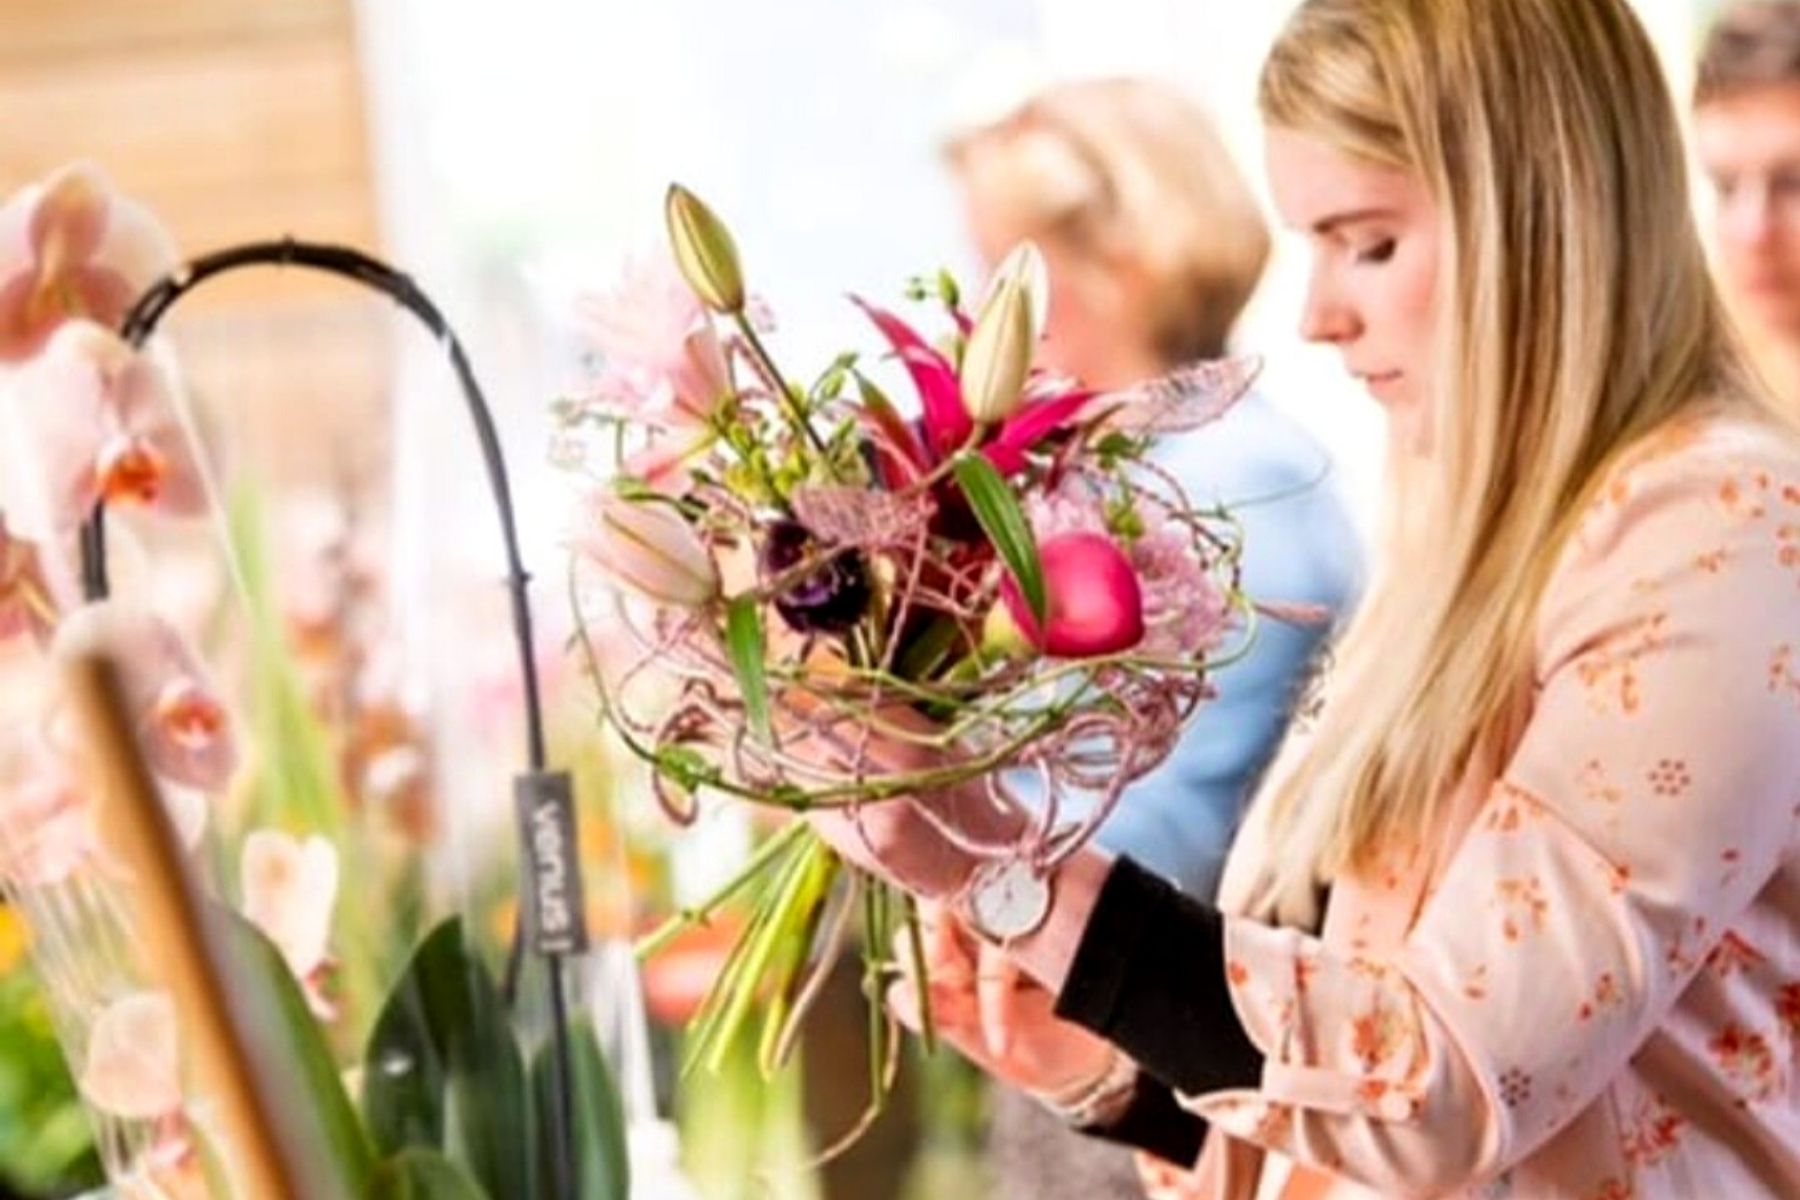 A Floral Interview With Melissa Smedes, Third in the Dutch Junior Championship Floral Art - Article on Thursd  (2)